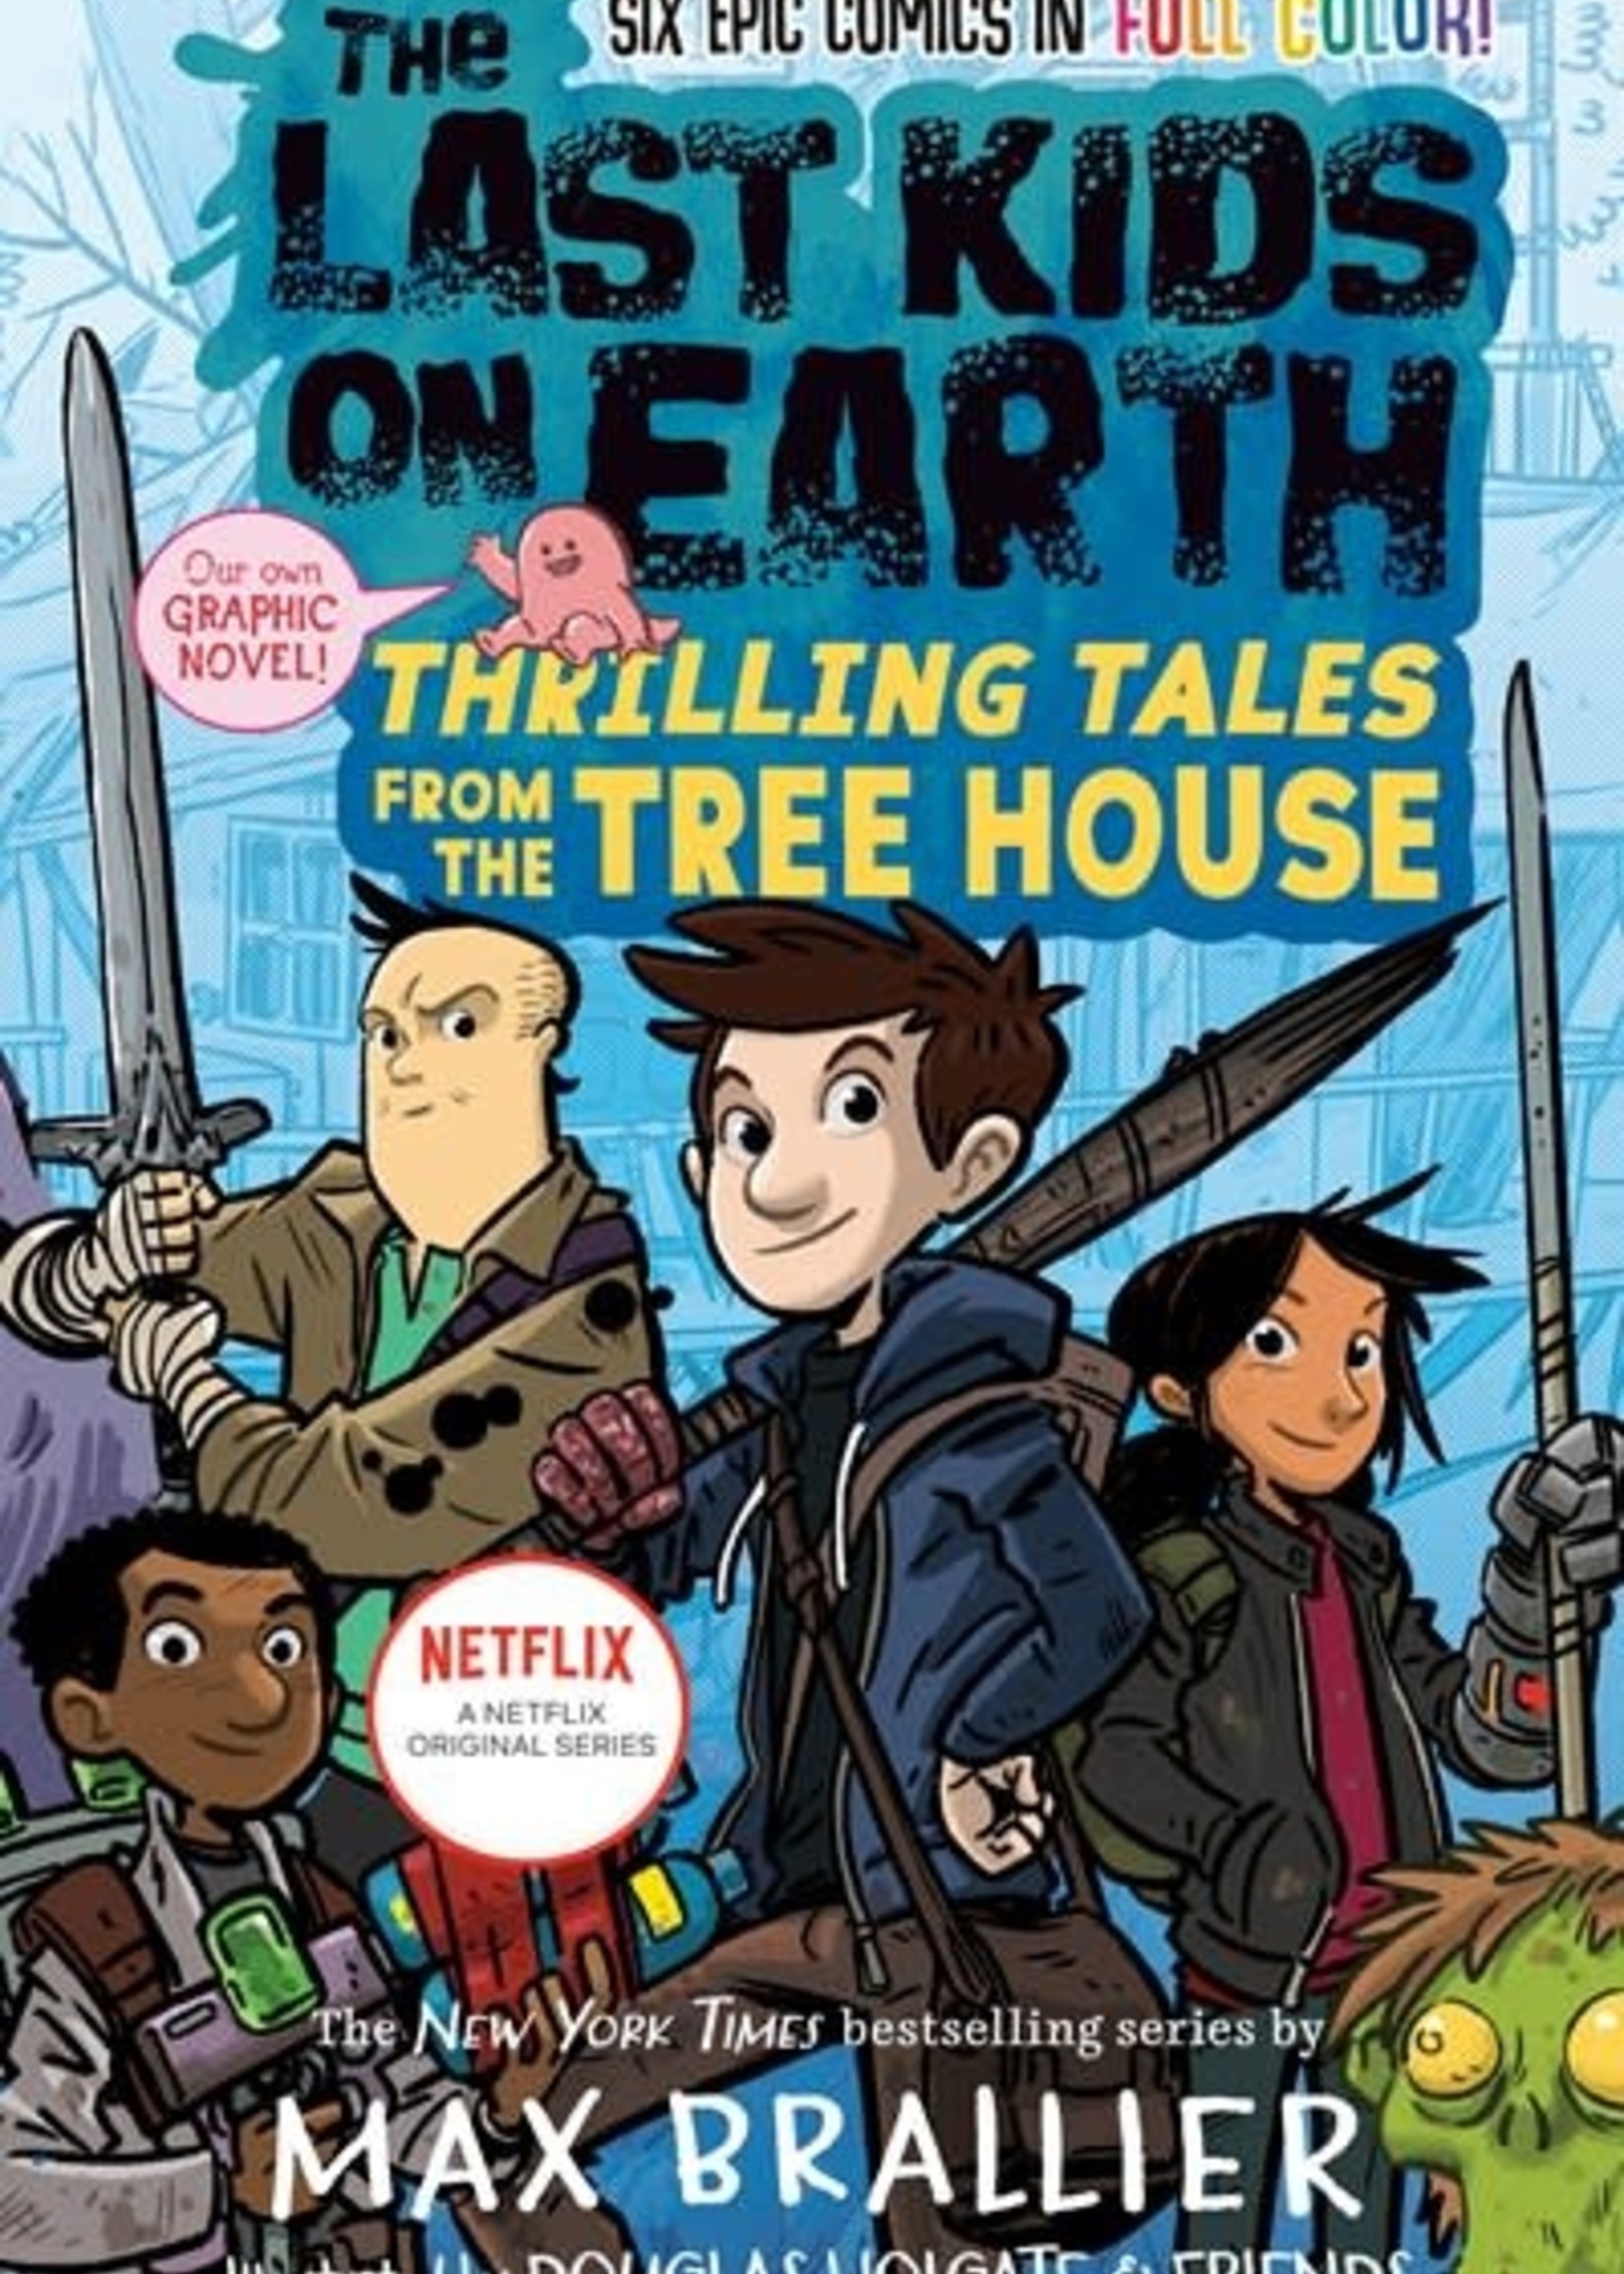 The Last Kids on Earth, Thrilling Tales from the Tree House, Graphic Novel